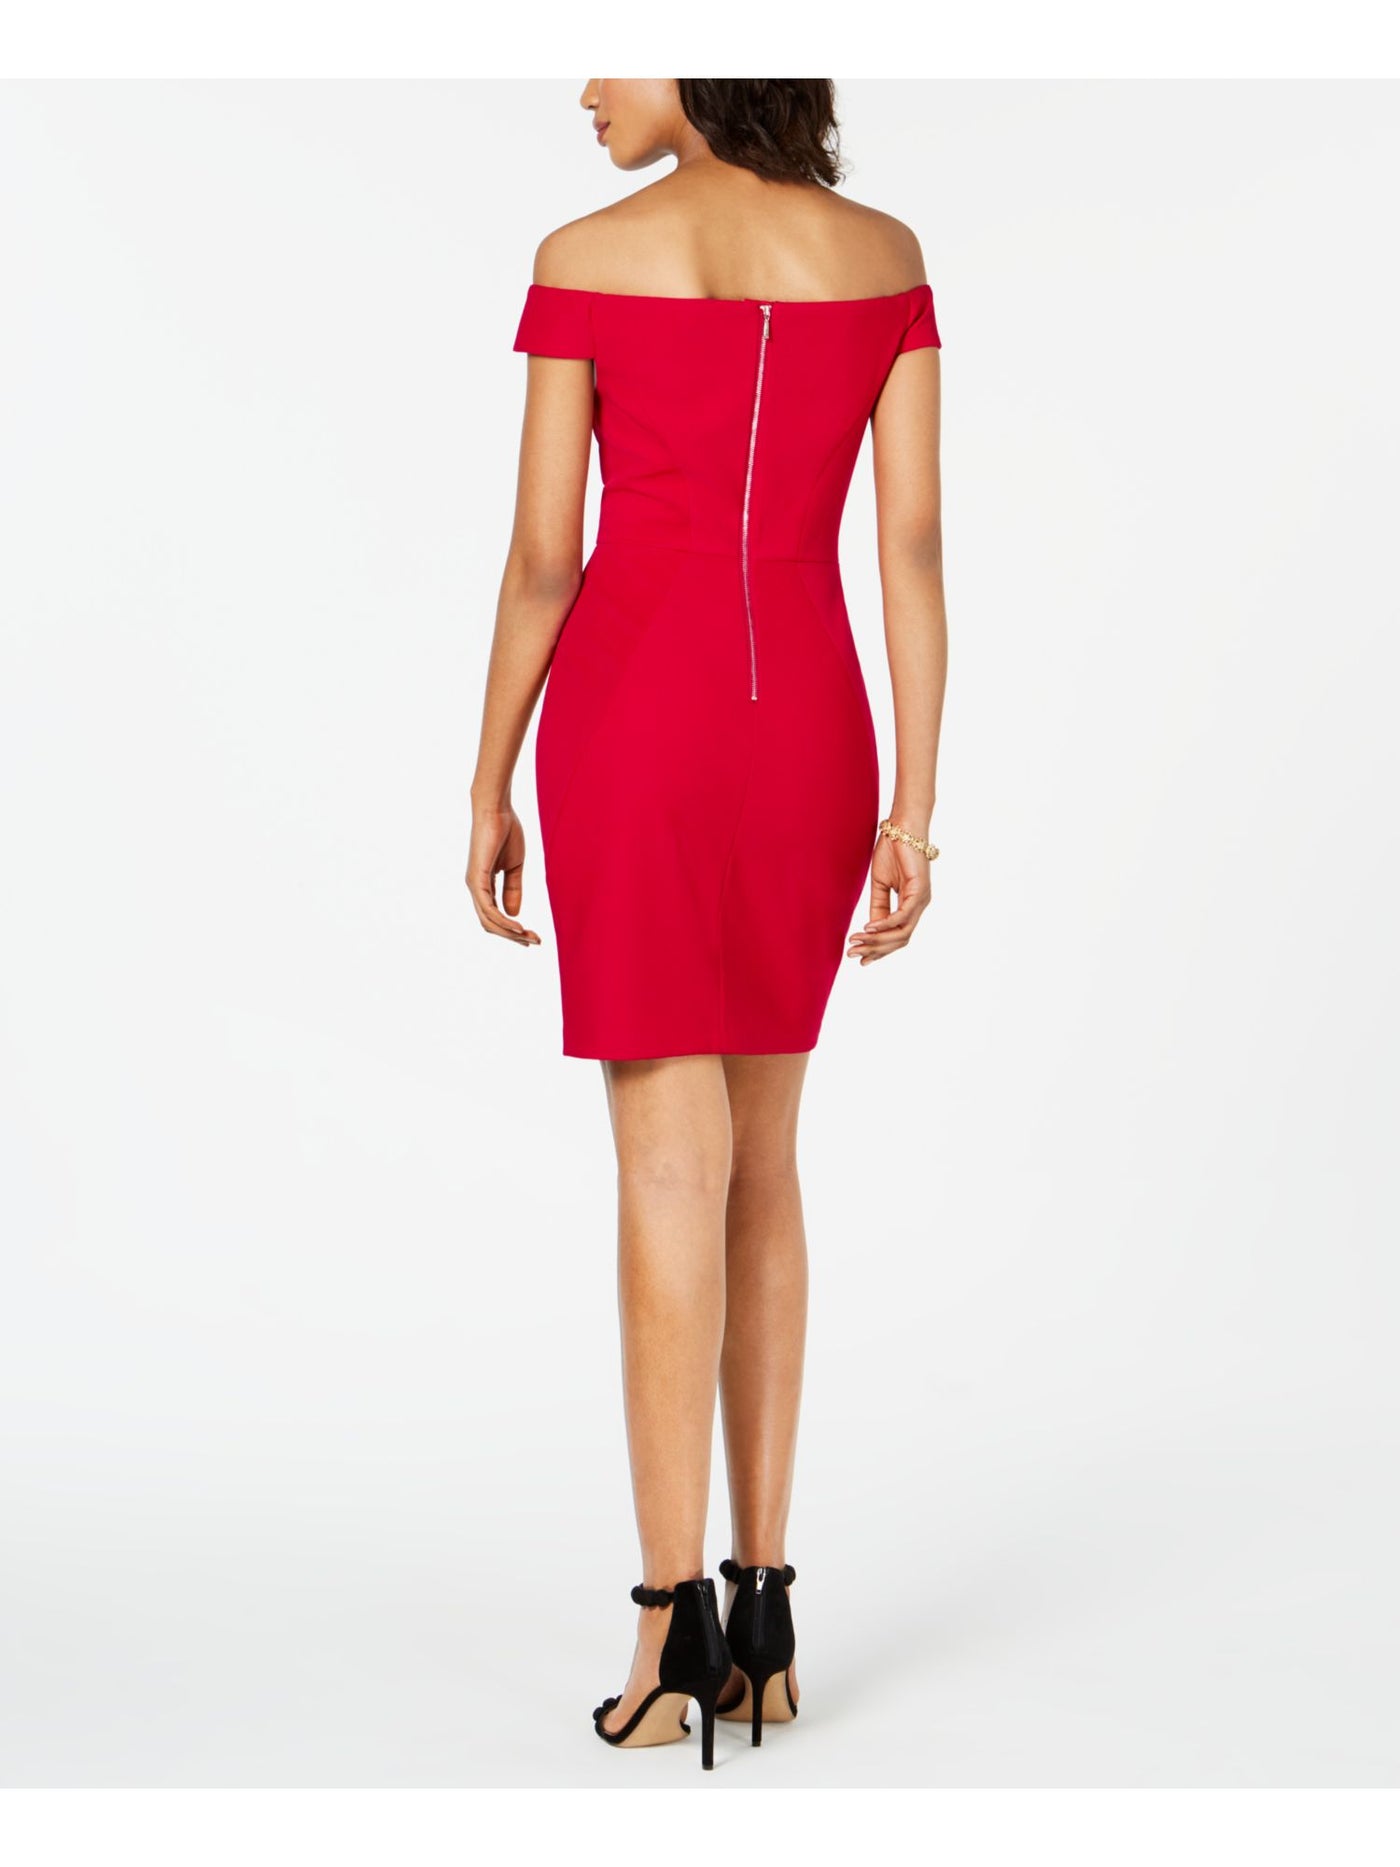 ADRIANNA PAPELL Womens Red Zippered Textured Off Shoulder Short Evening Body Con Dress 14